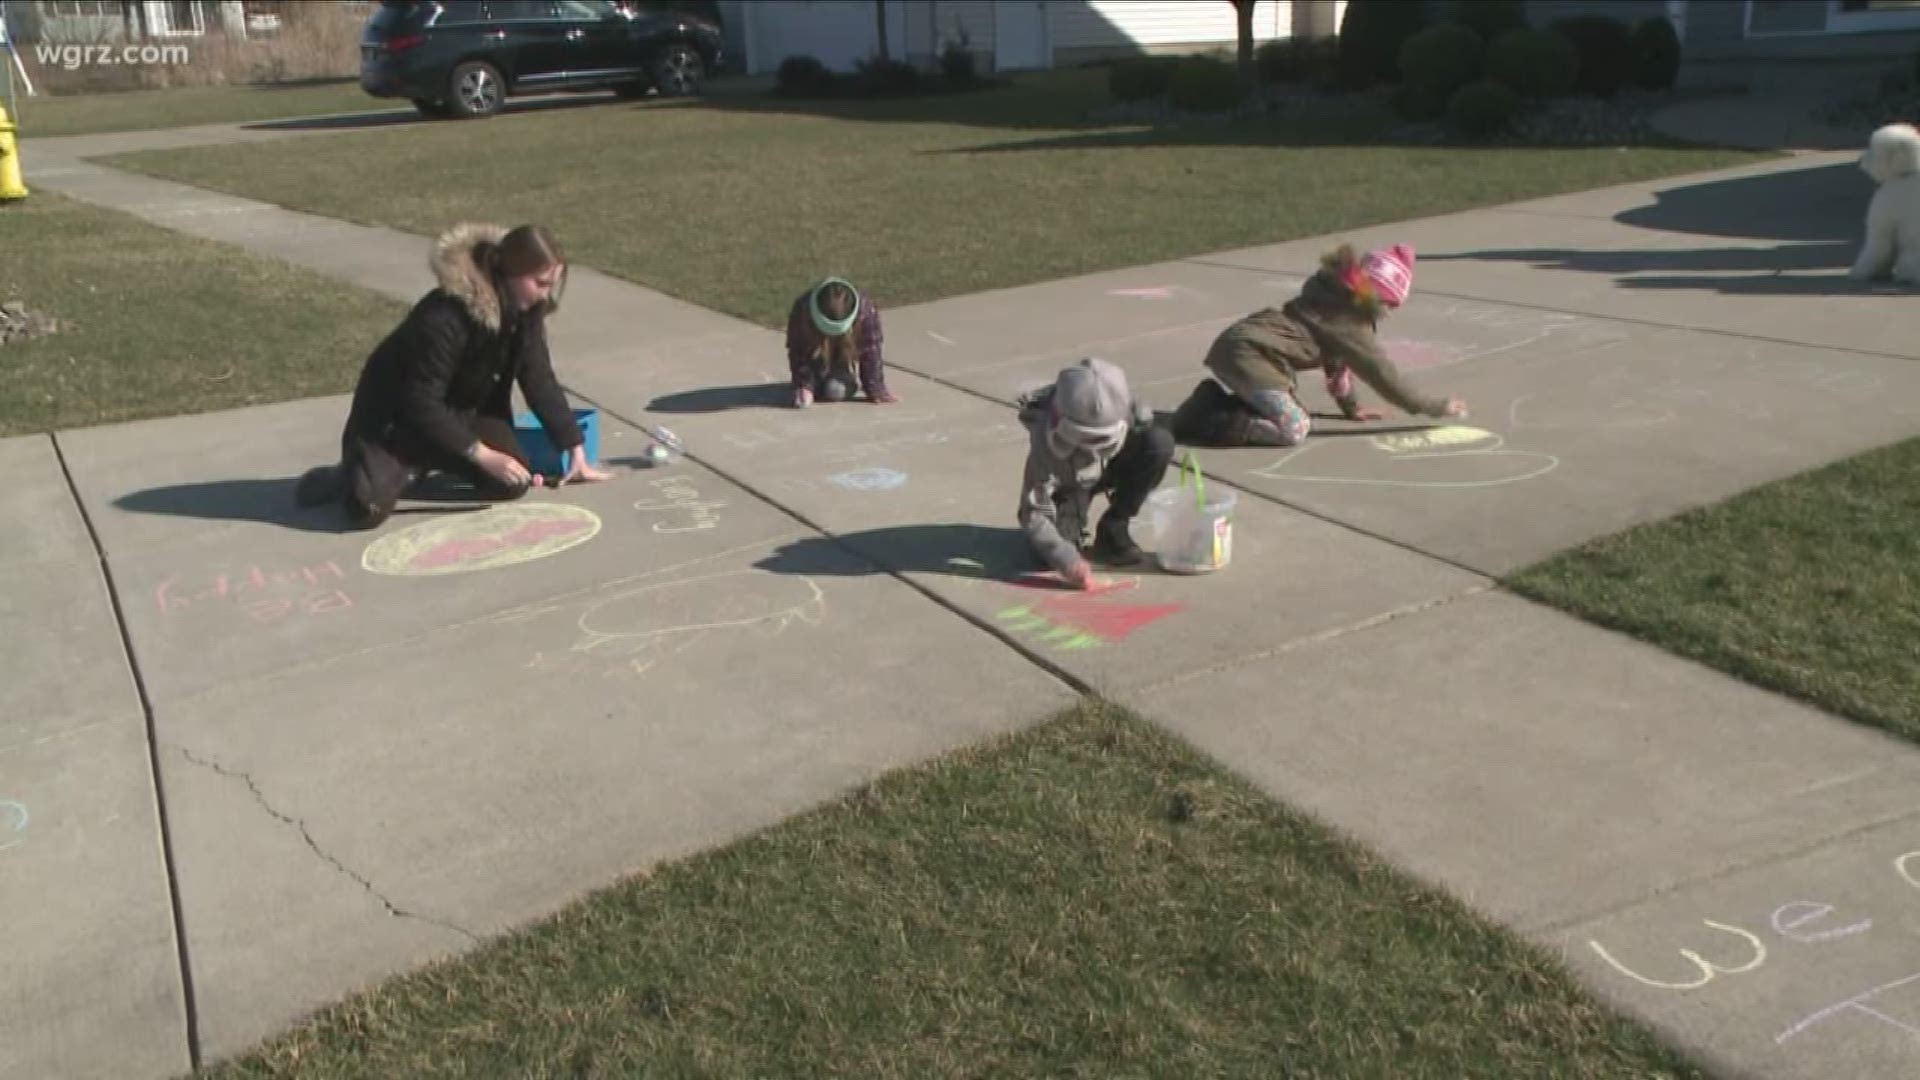 This afternoon, neighbors out in Lancaster were out drawing on the sidewalks in chalk, leaving a positive message or picture for people to look at as they passed by.